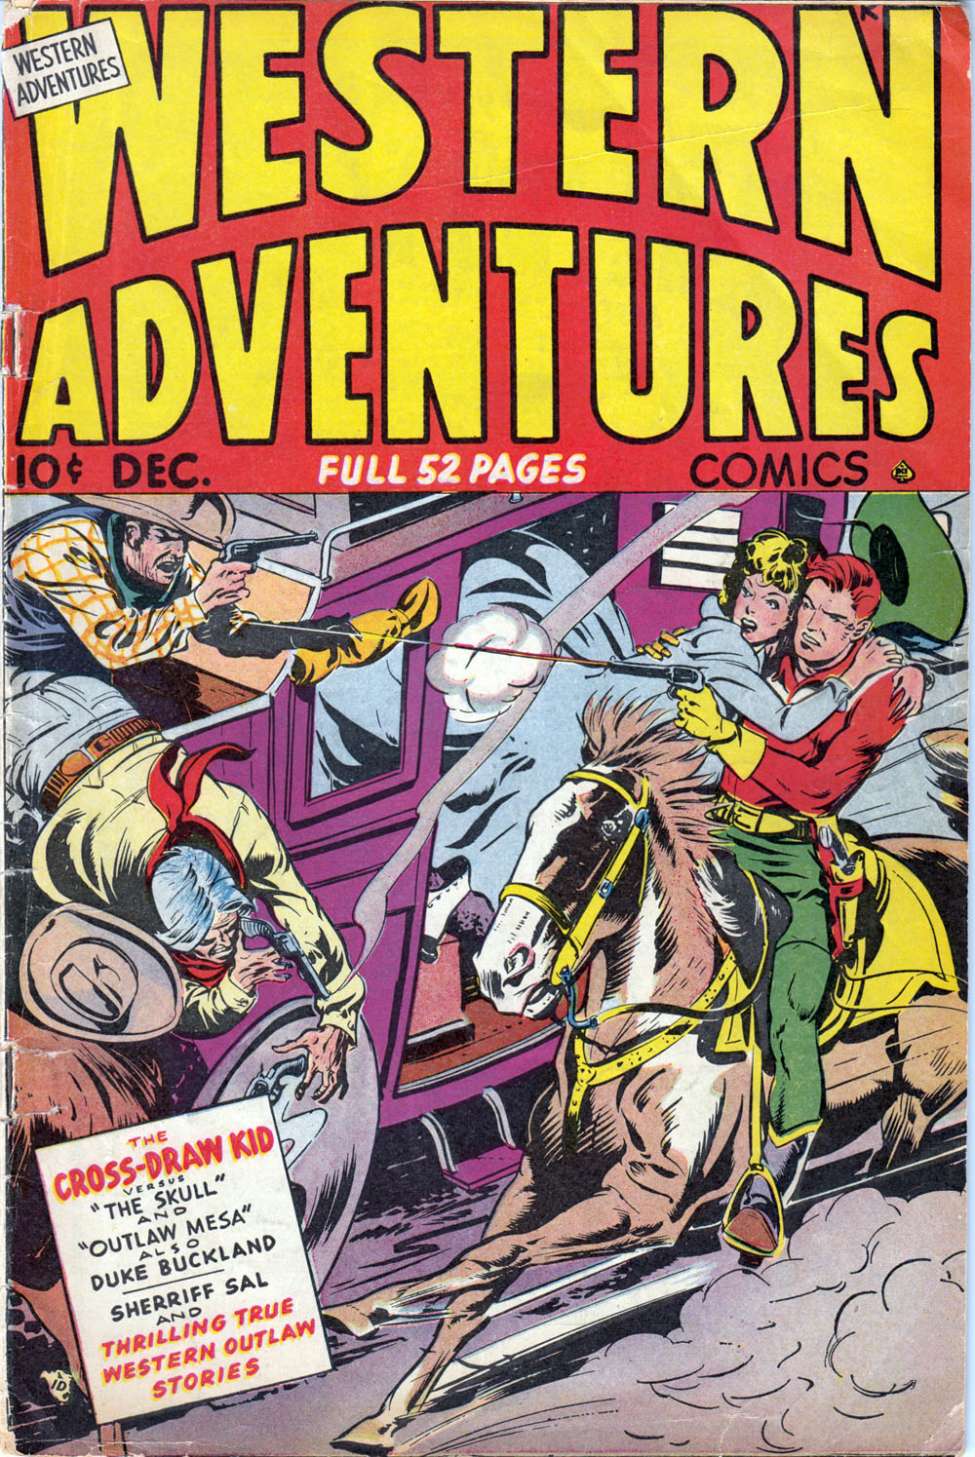 Book Cover For Western Adventures 2 - Version 1